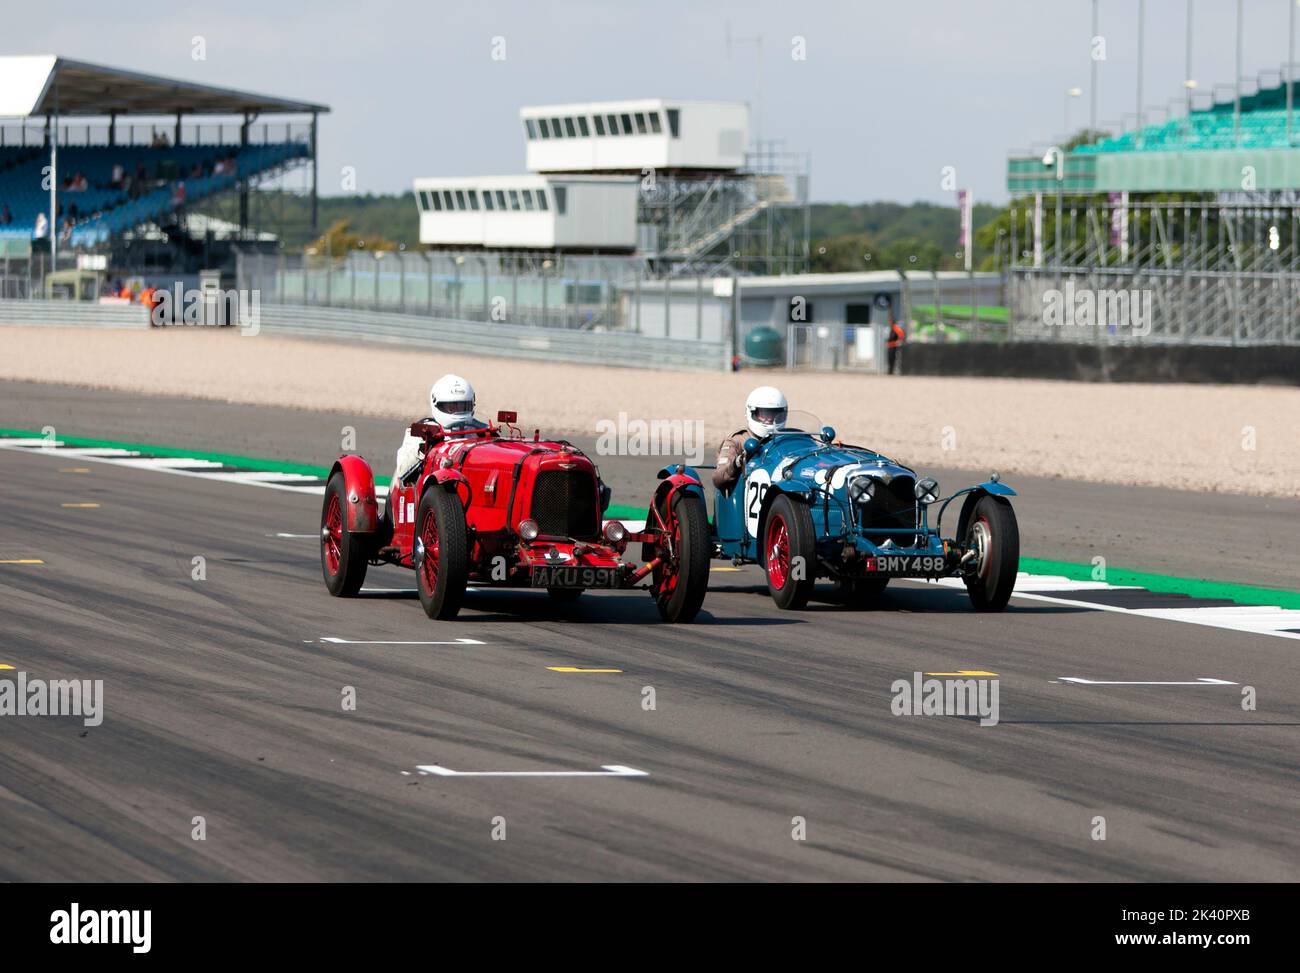 Edward Bradley in the 1935, Red, Aston Martin Ulster,  dices with Richard Little, in the 1934, Blue Riley Kestrel Sports, down the Hamilton Straight Stock Photo